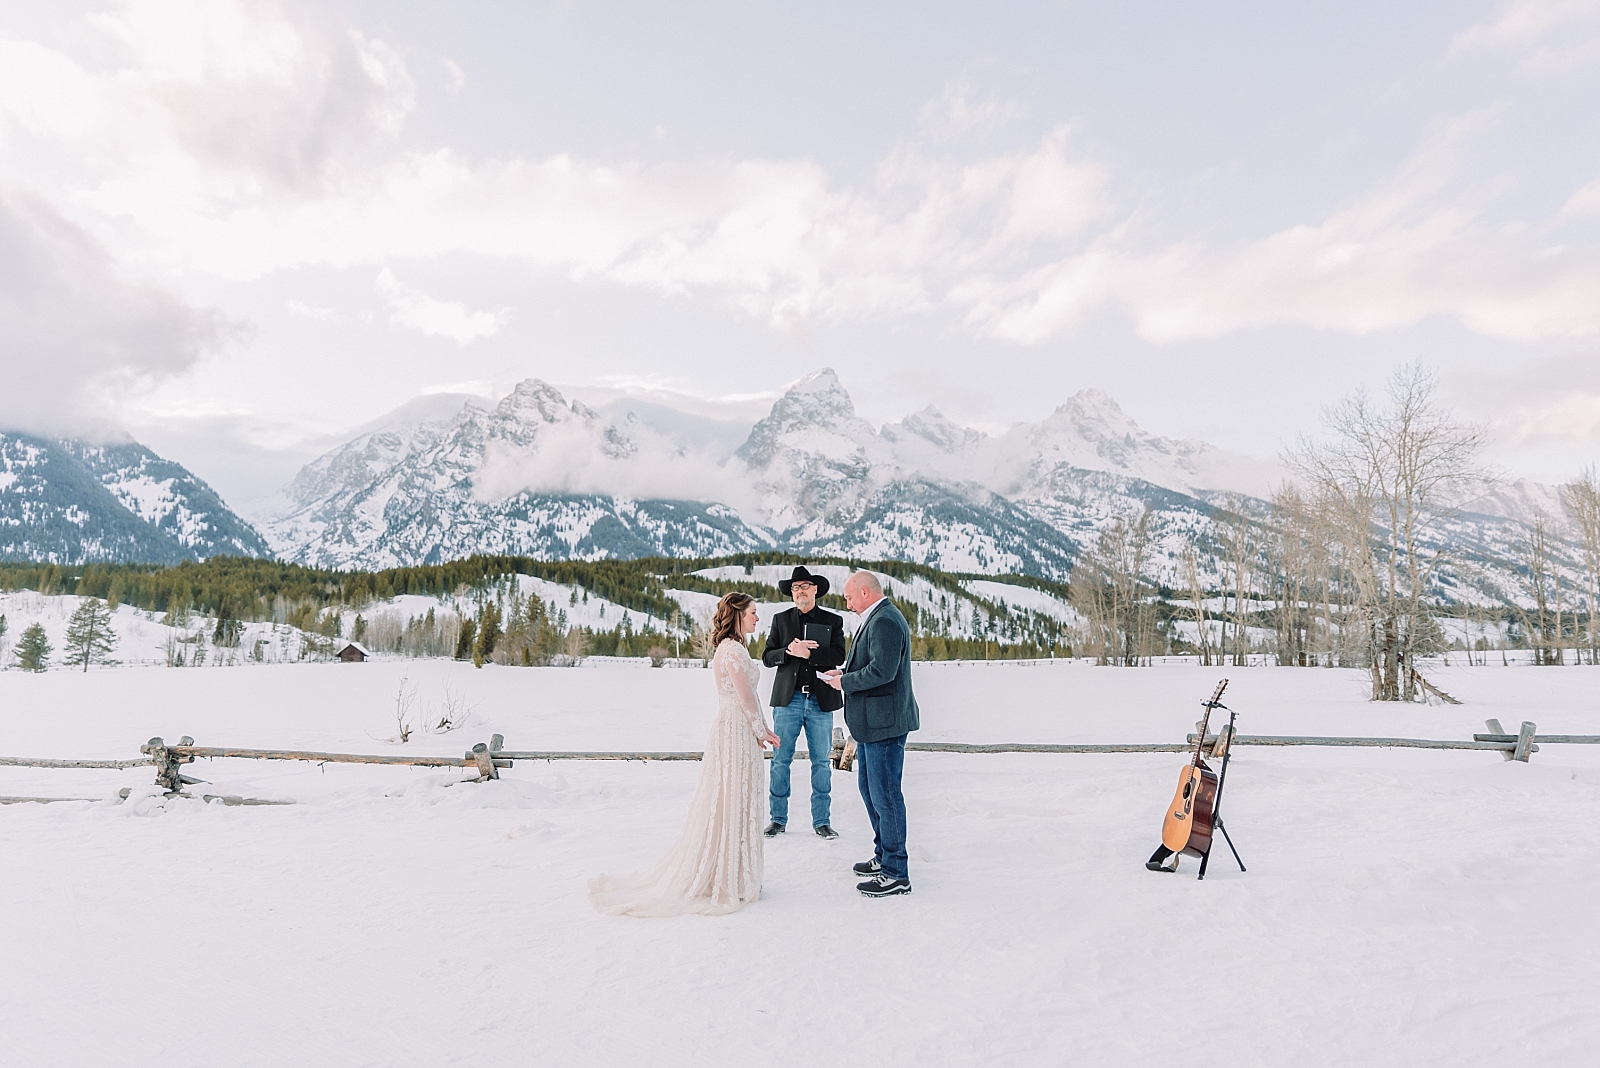 vow renewal in jackson hole